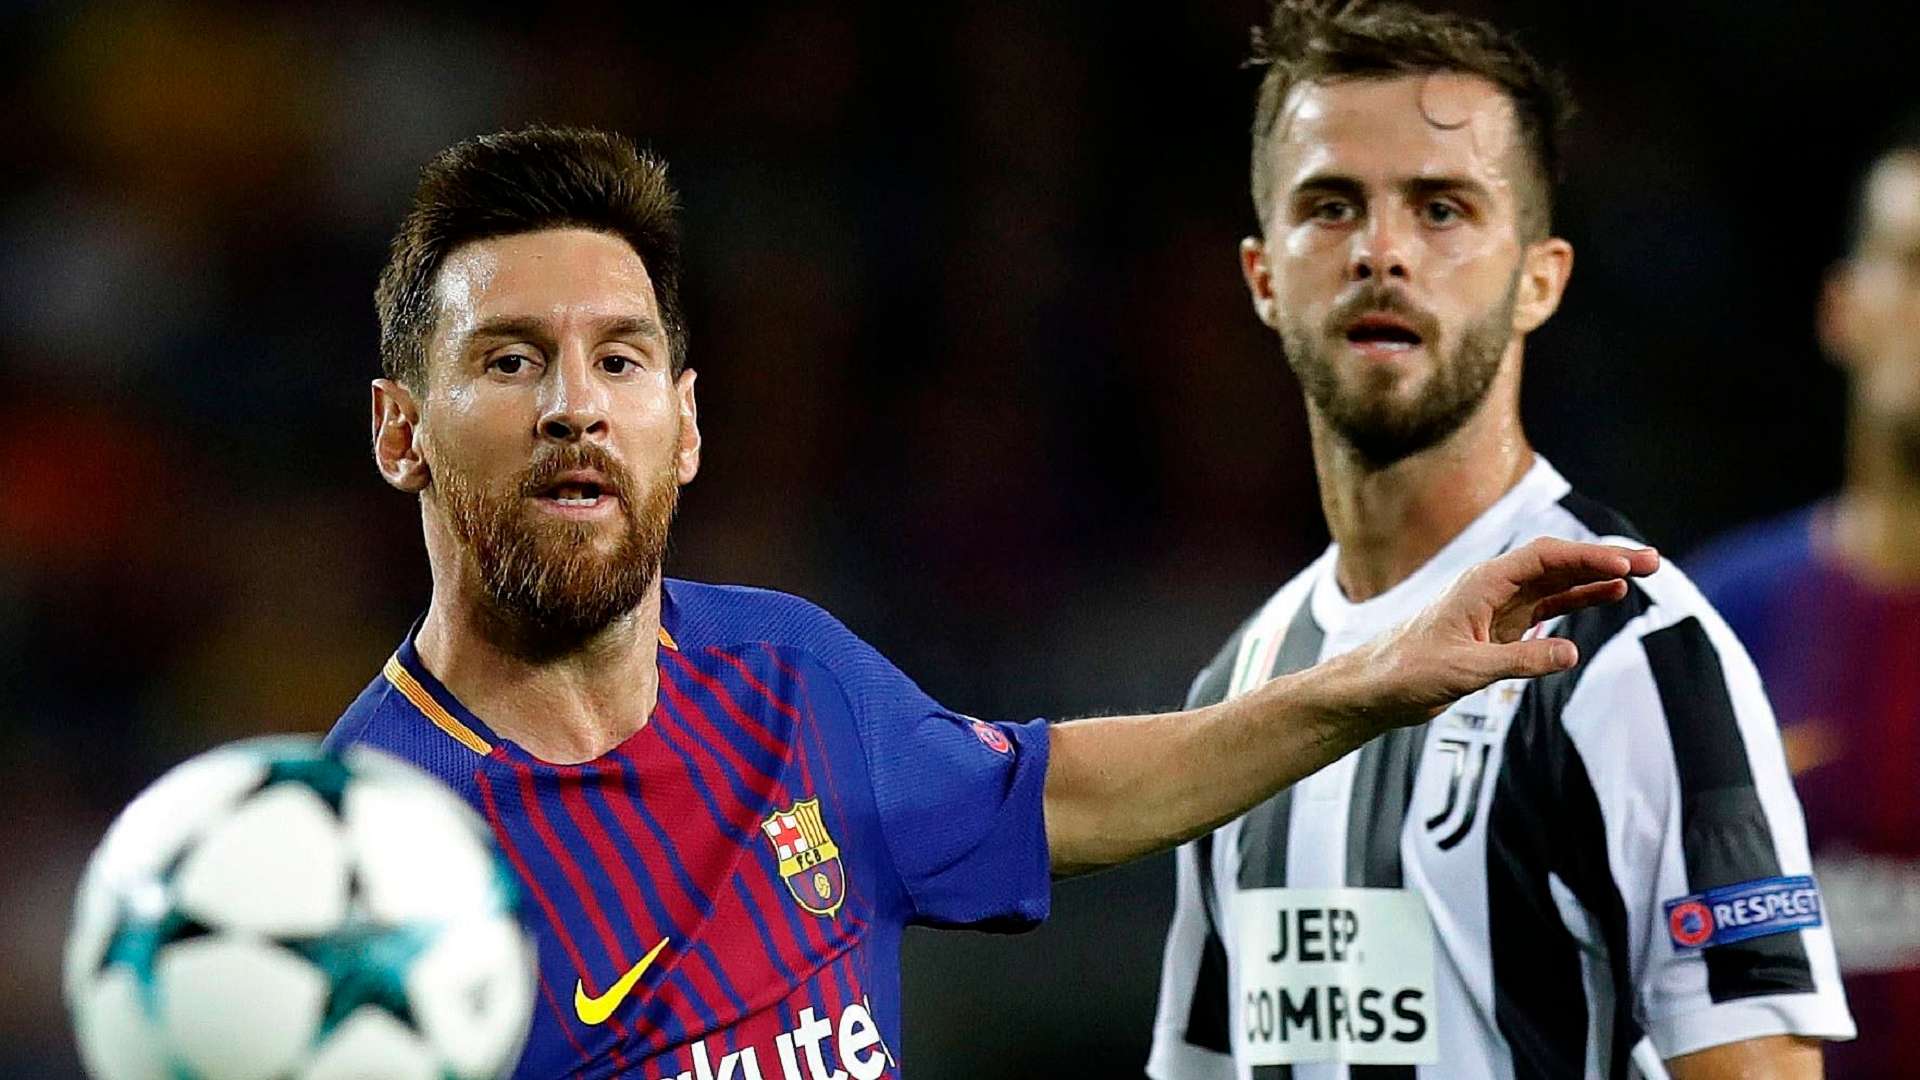 Miralem Pjanic of Juventus and Lionel Messi of Barcelona